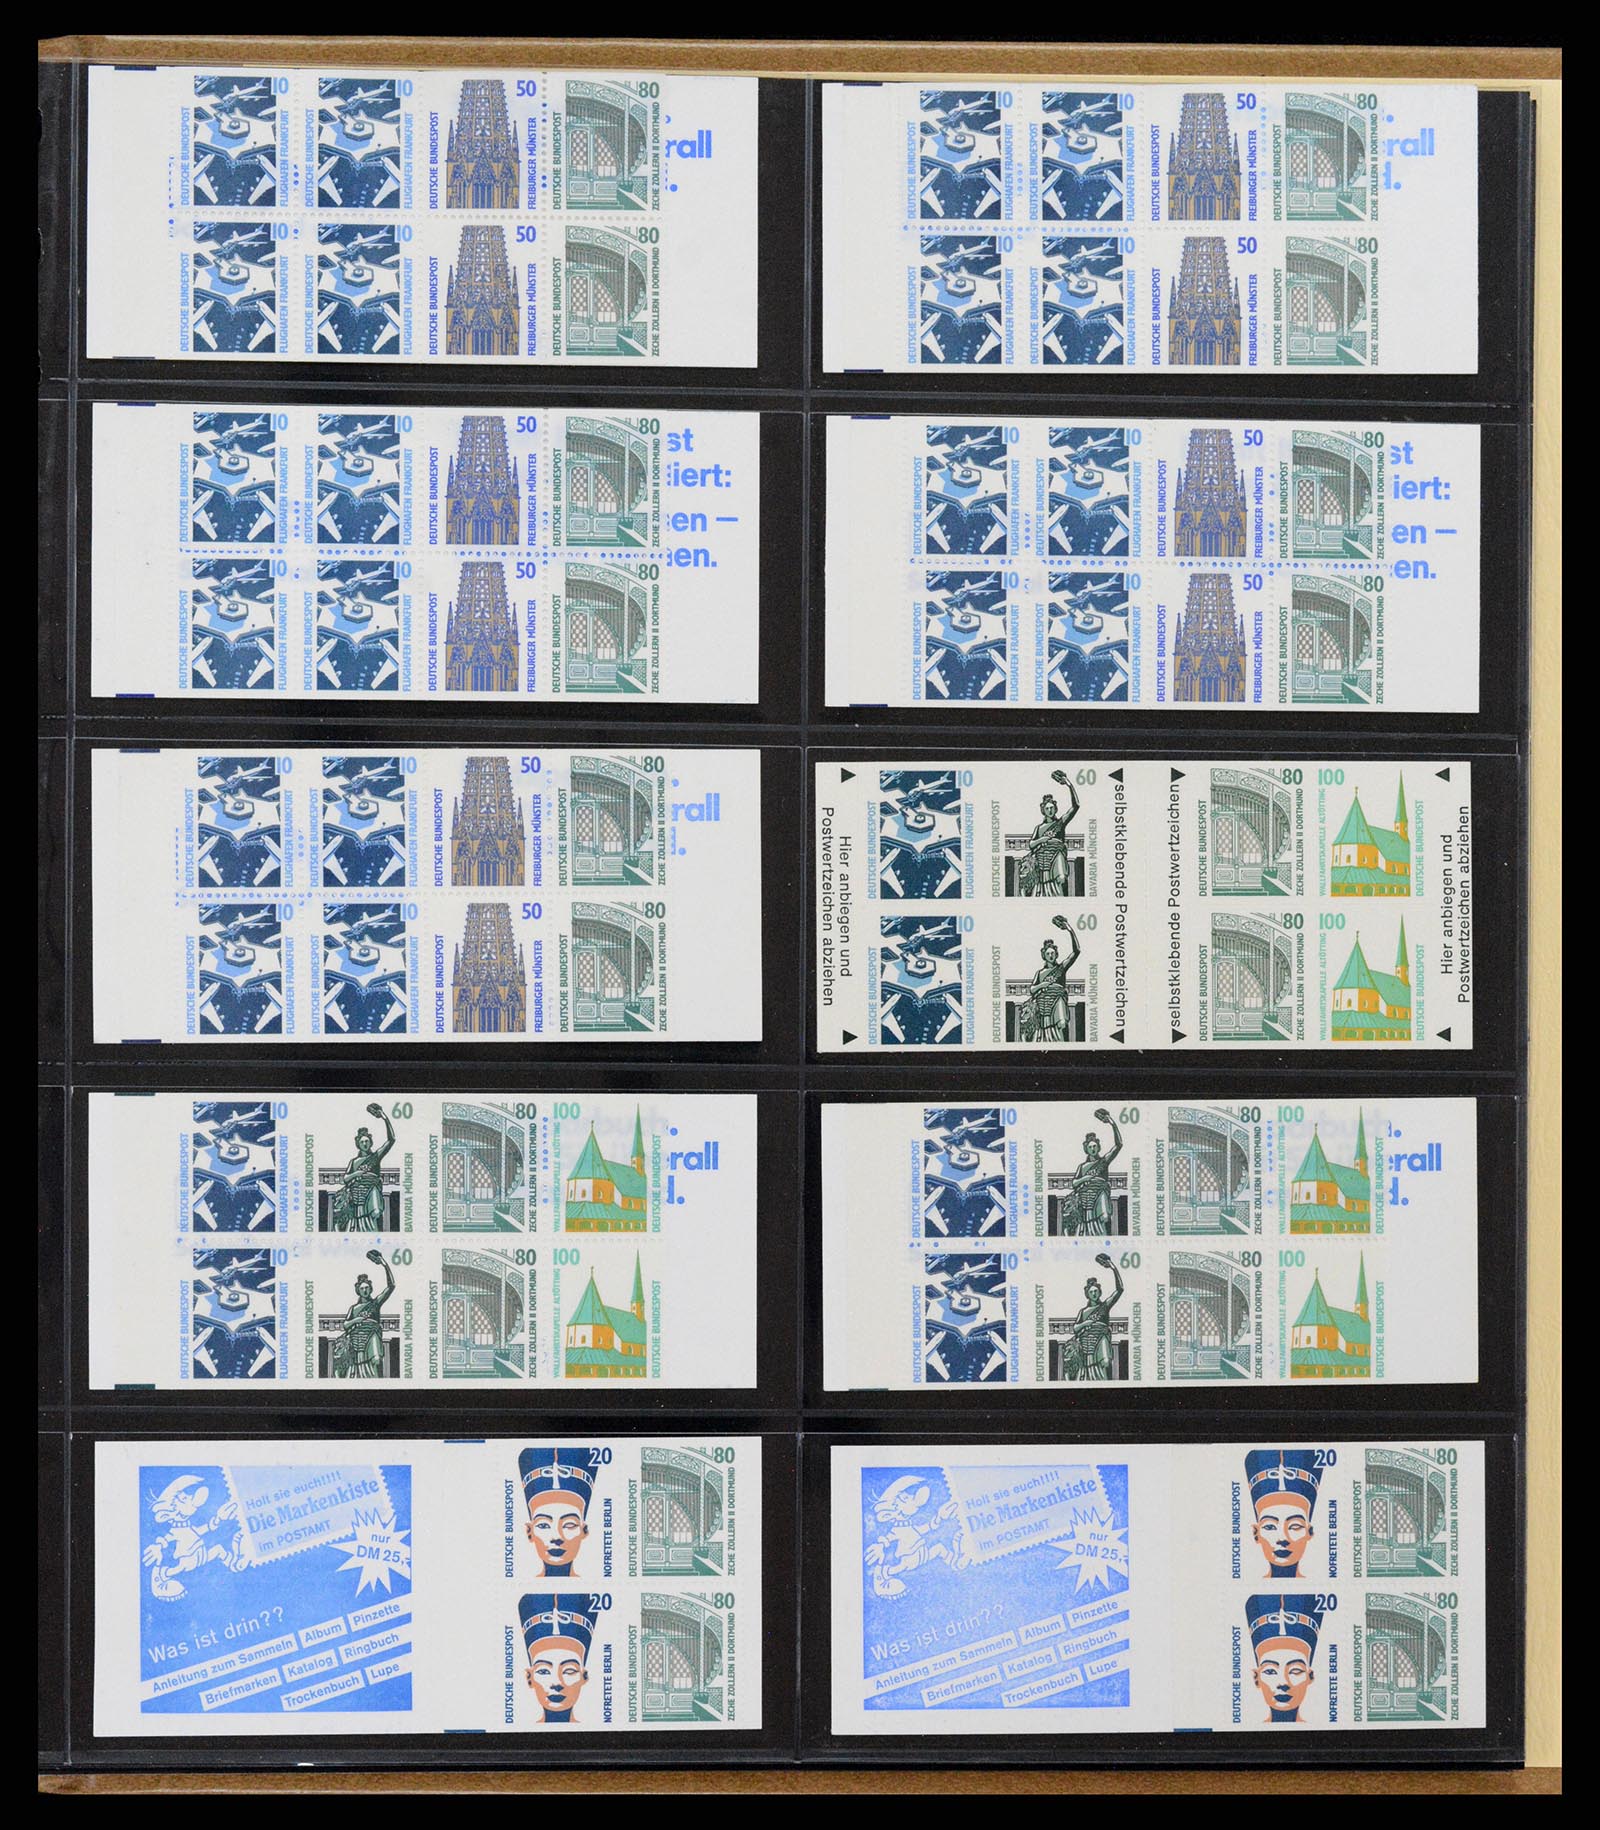 37365 056 - Stamp collection 37365 Bundespost stamp booklets 1951-2001.